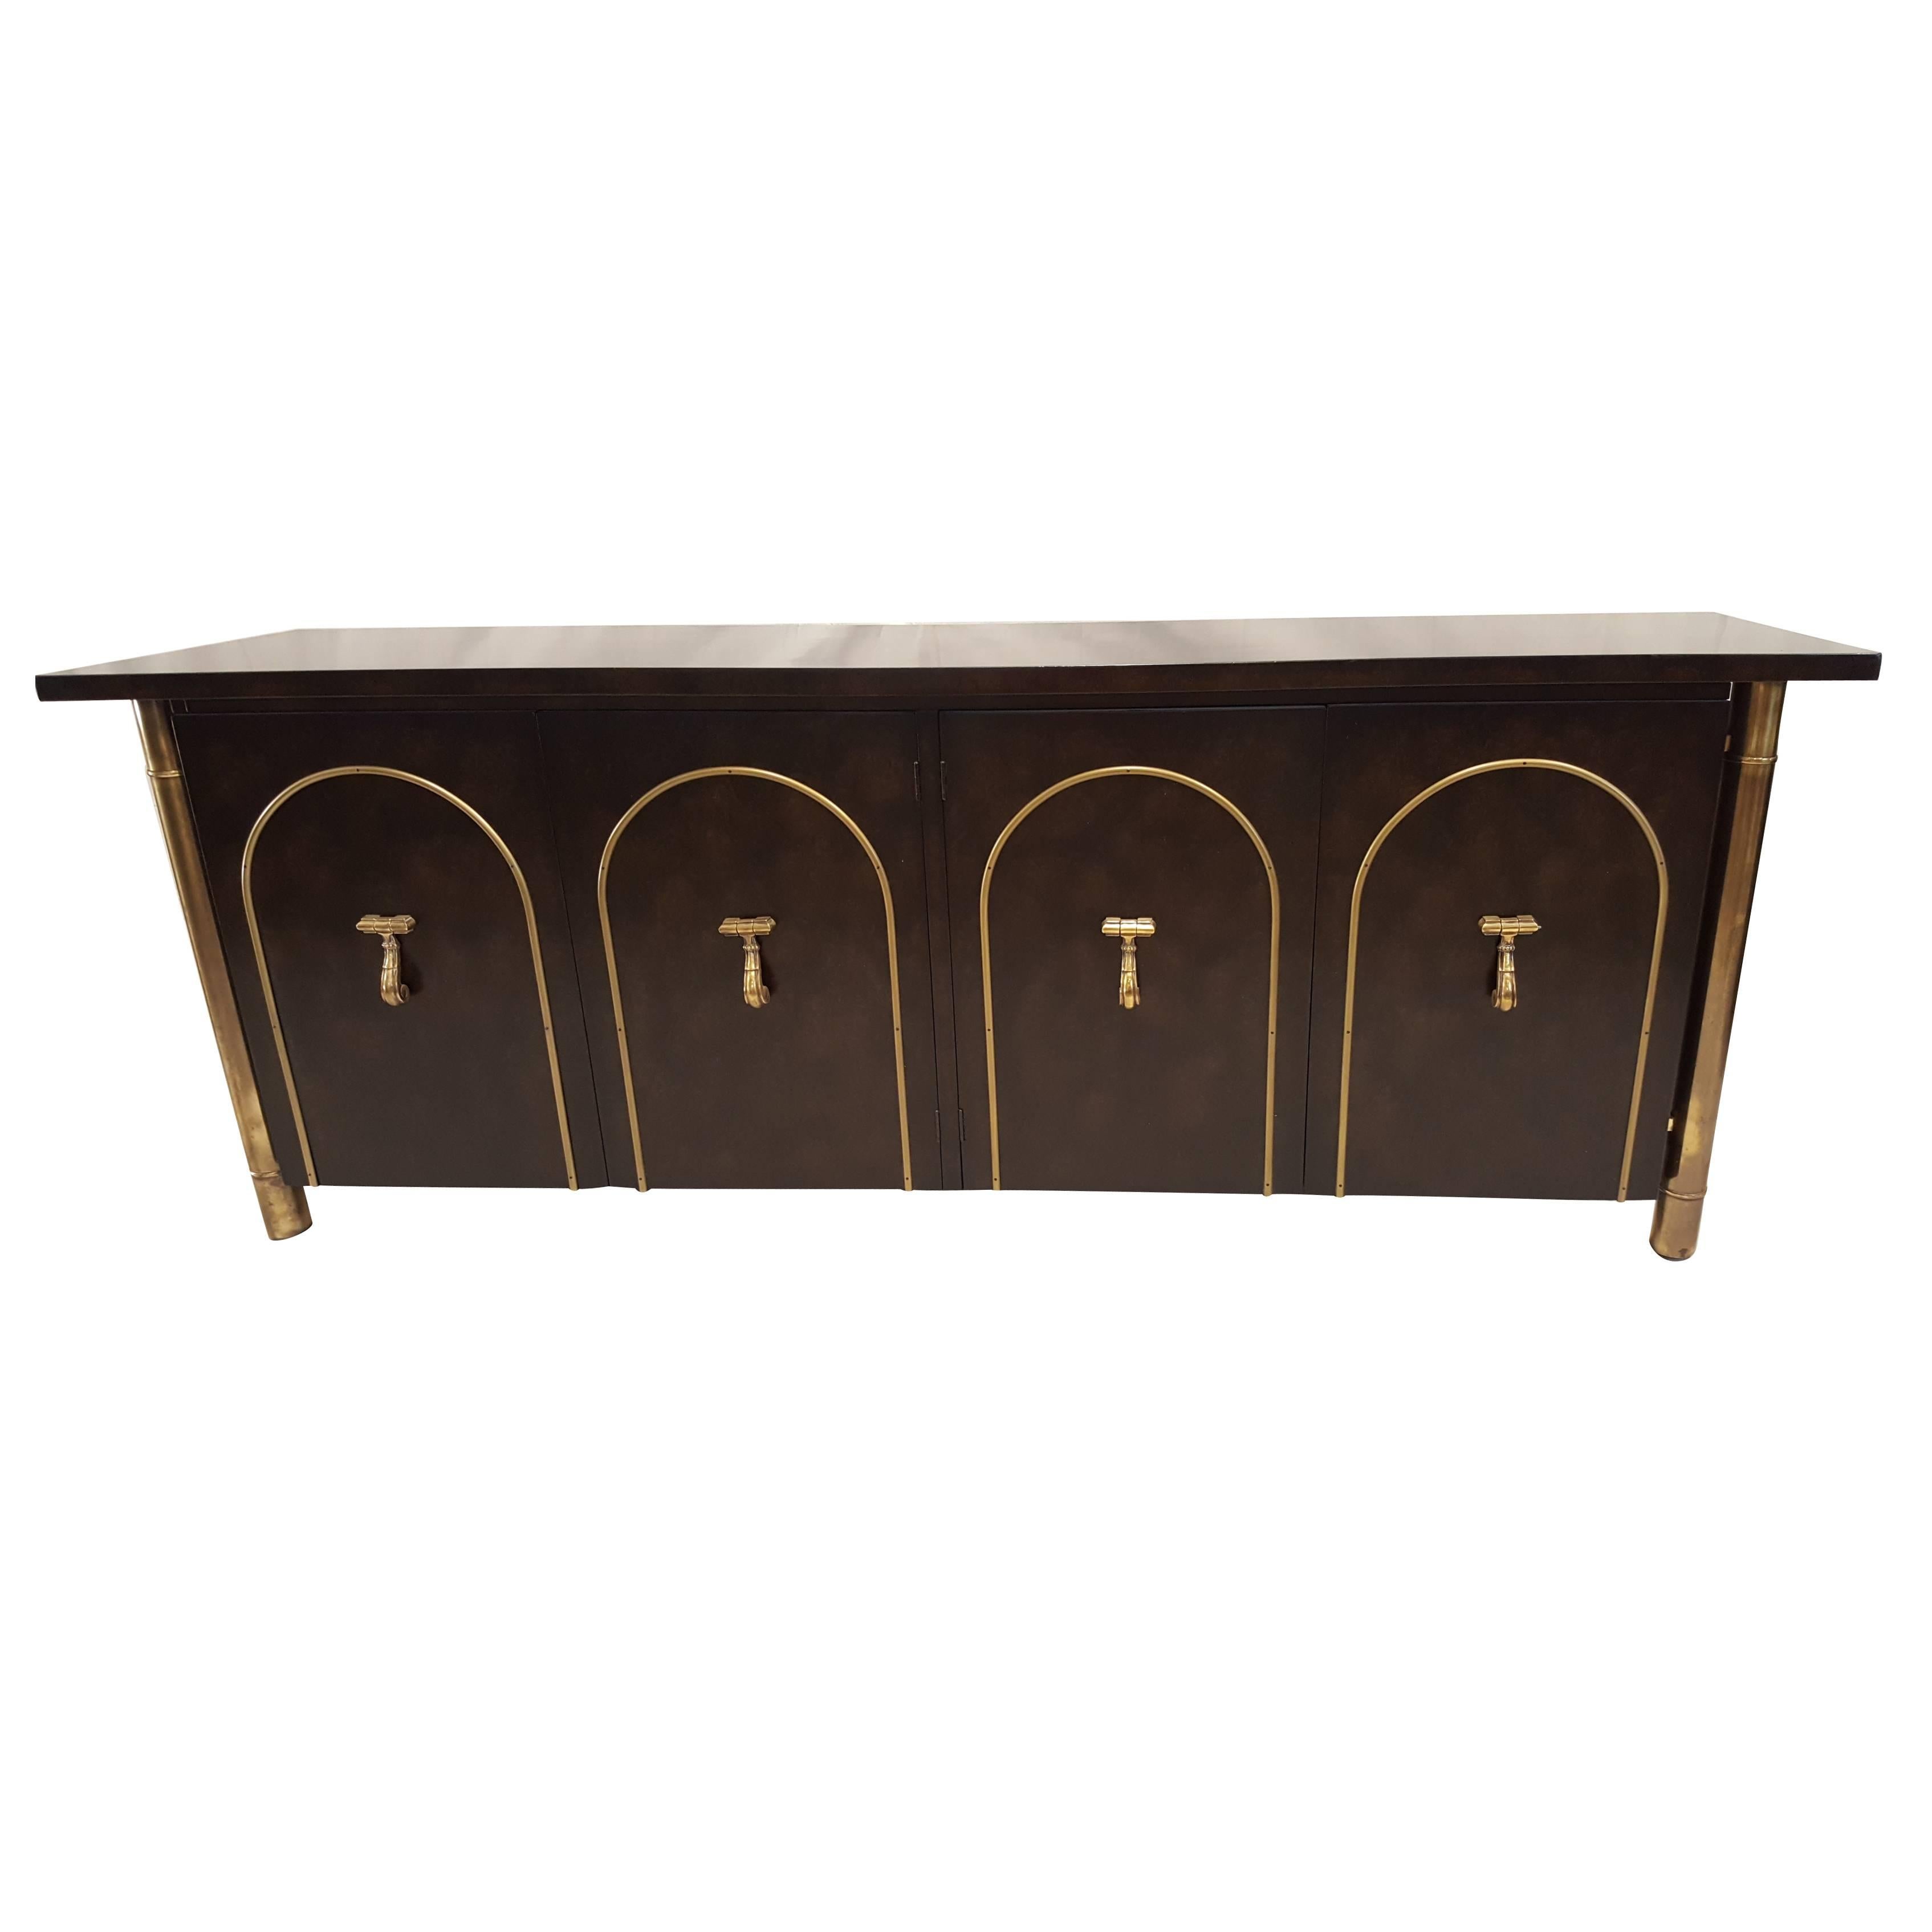 Mastercraft Credenza or Buffet For Sale